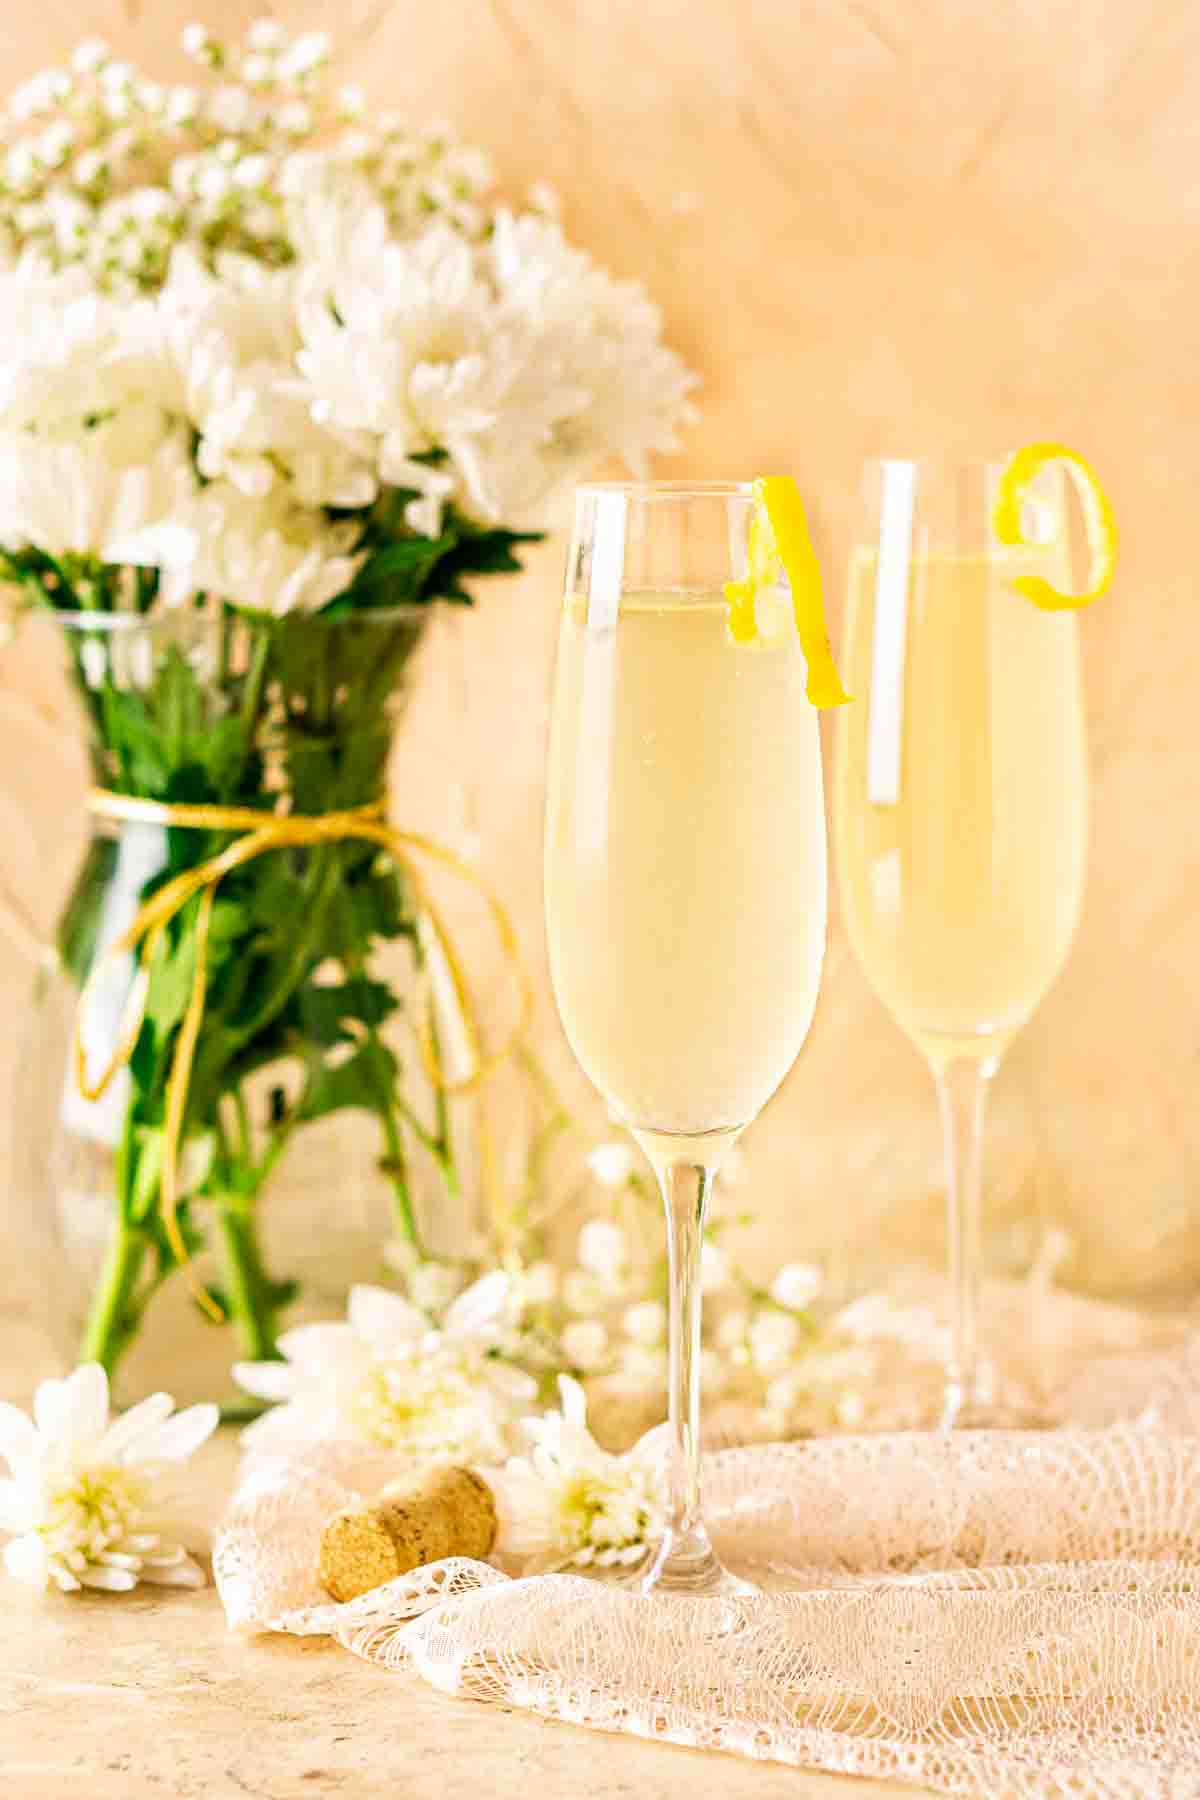 Two French 76 cocktails on lace with a cork to the left and white flowers in the background.